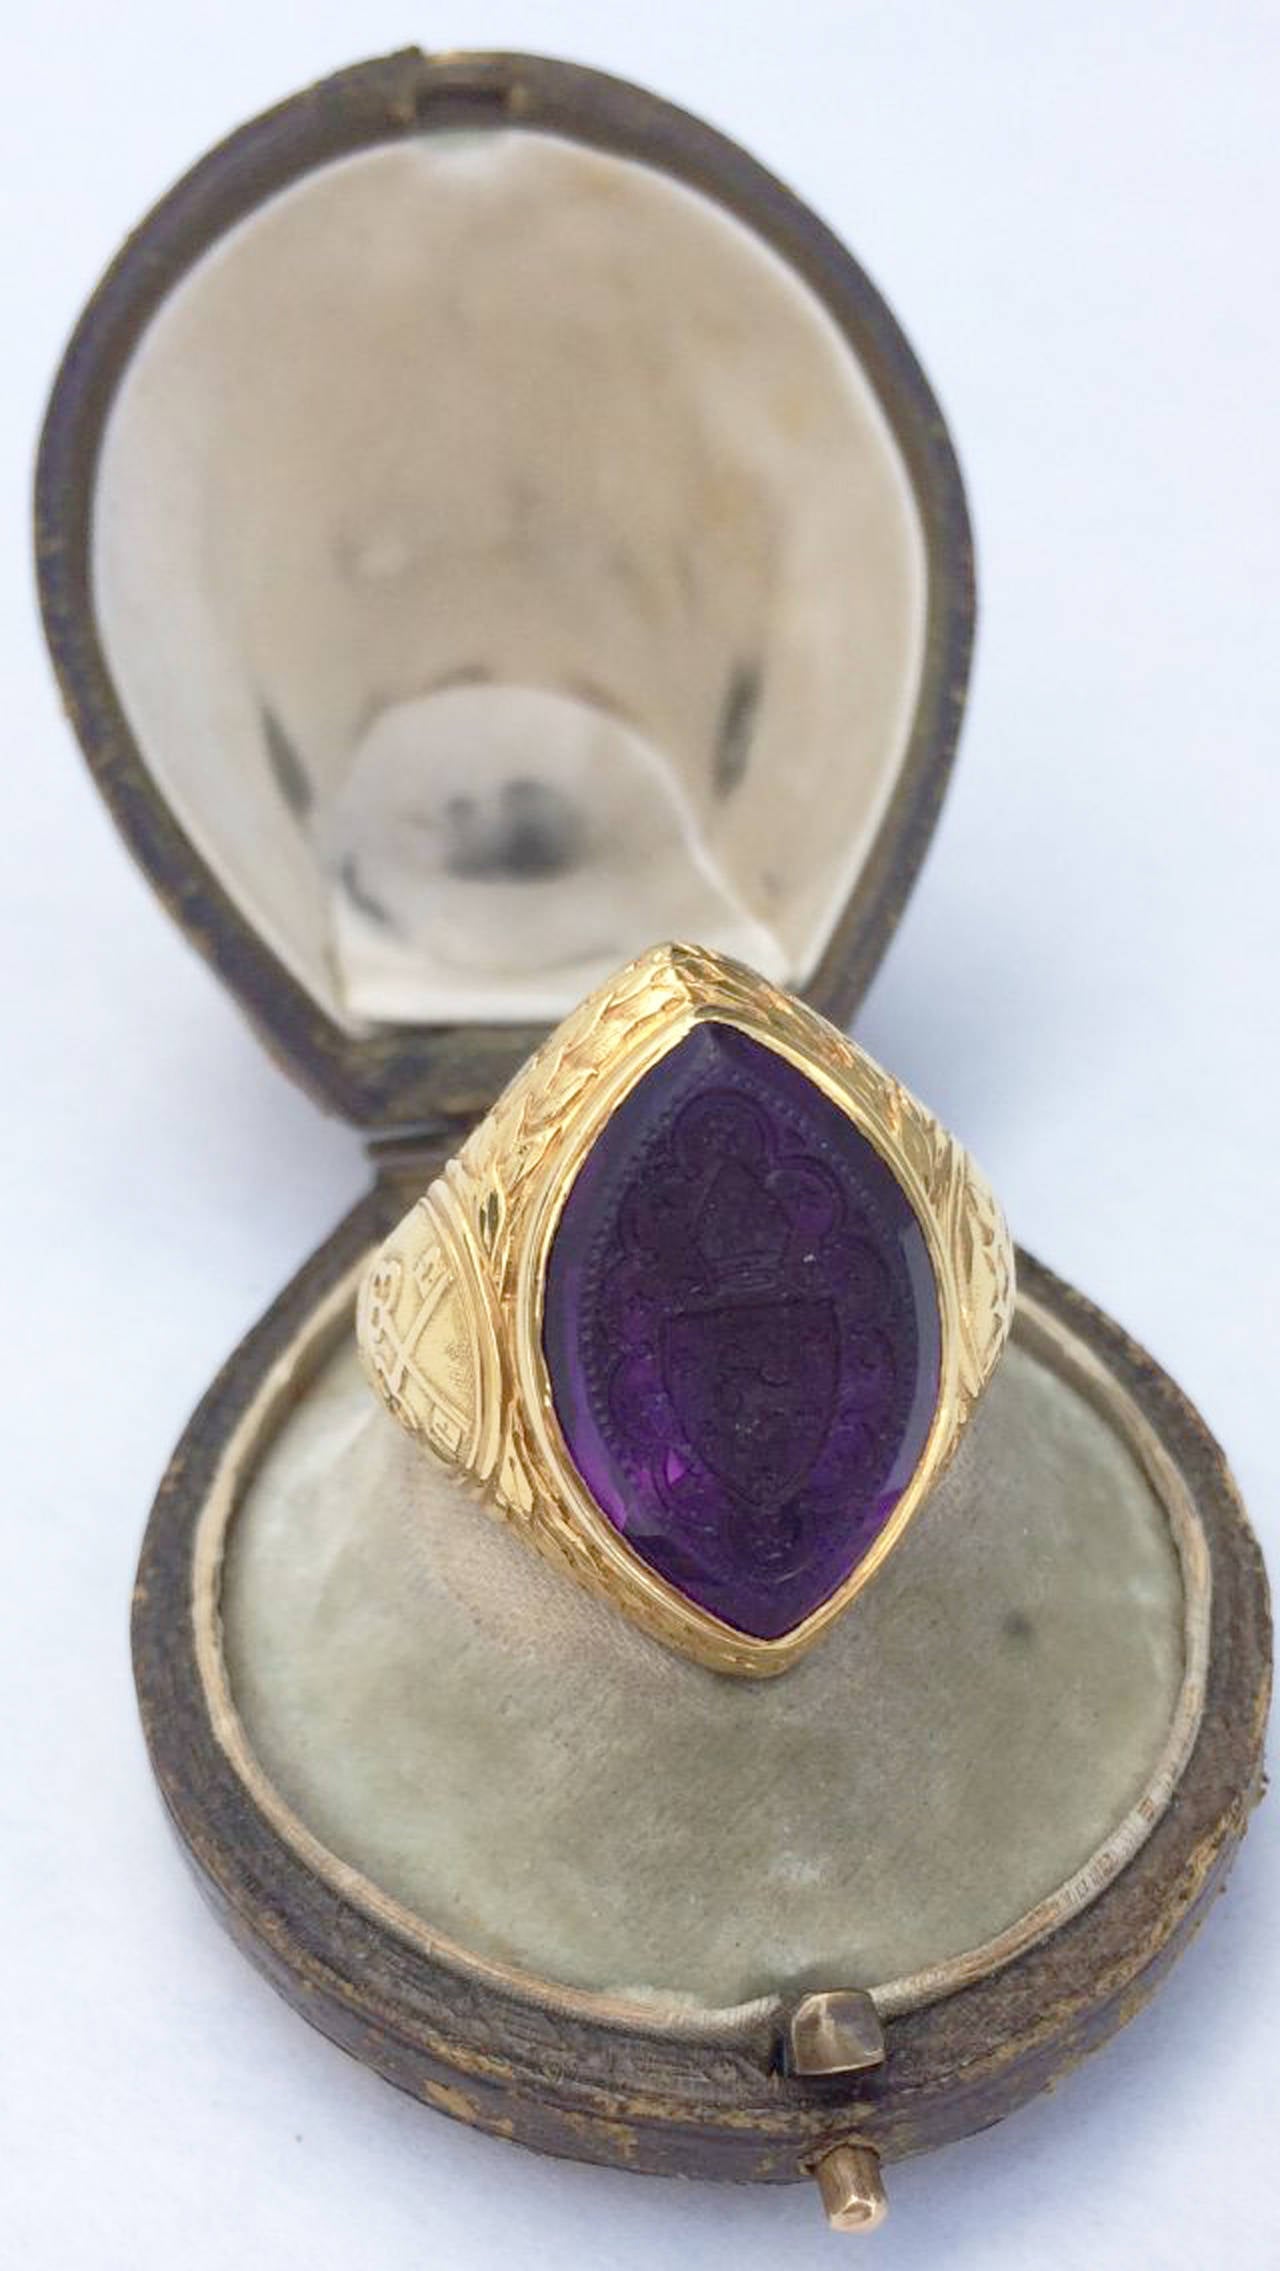 A fine and rare Victorian period Bishop's ring. Signed 18ct yellow gold item signed for T & J Bragg jewelers, Birmingham England circa1850. Exquisitely hand chased gold setting with a lush hand carved amethyst bezel set center. Rare item shows very